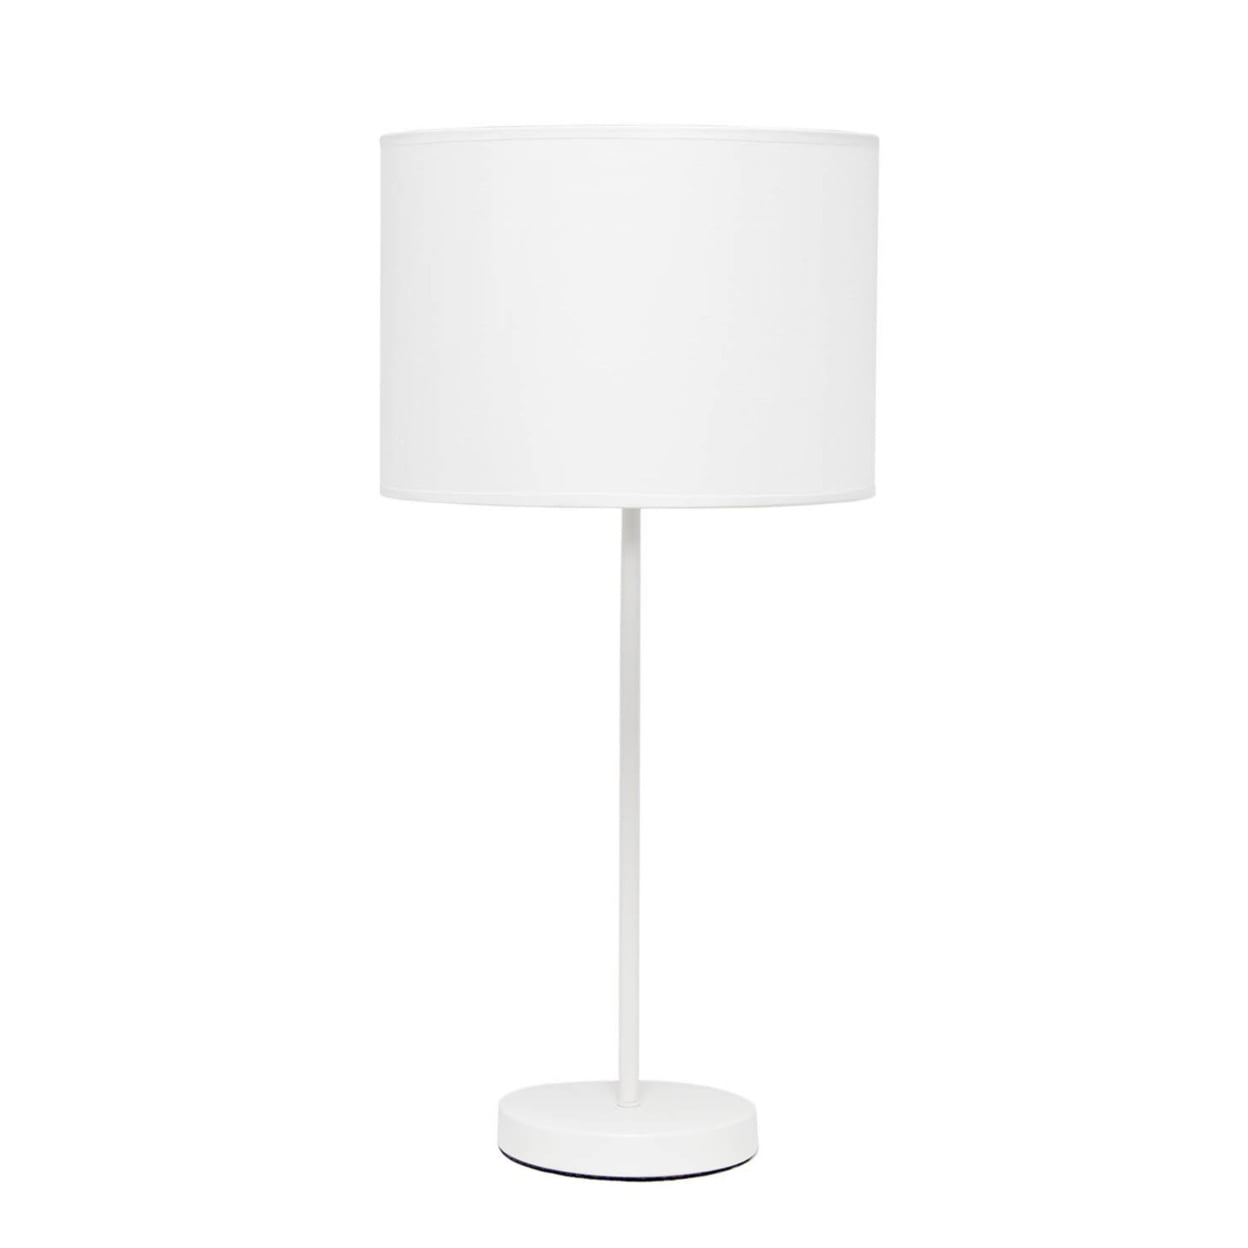 Lt2040-wow Stick With Fabric Shade Table Lamp, White